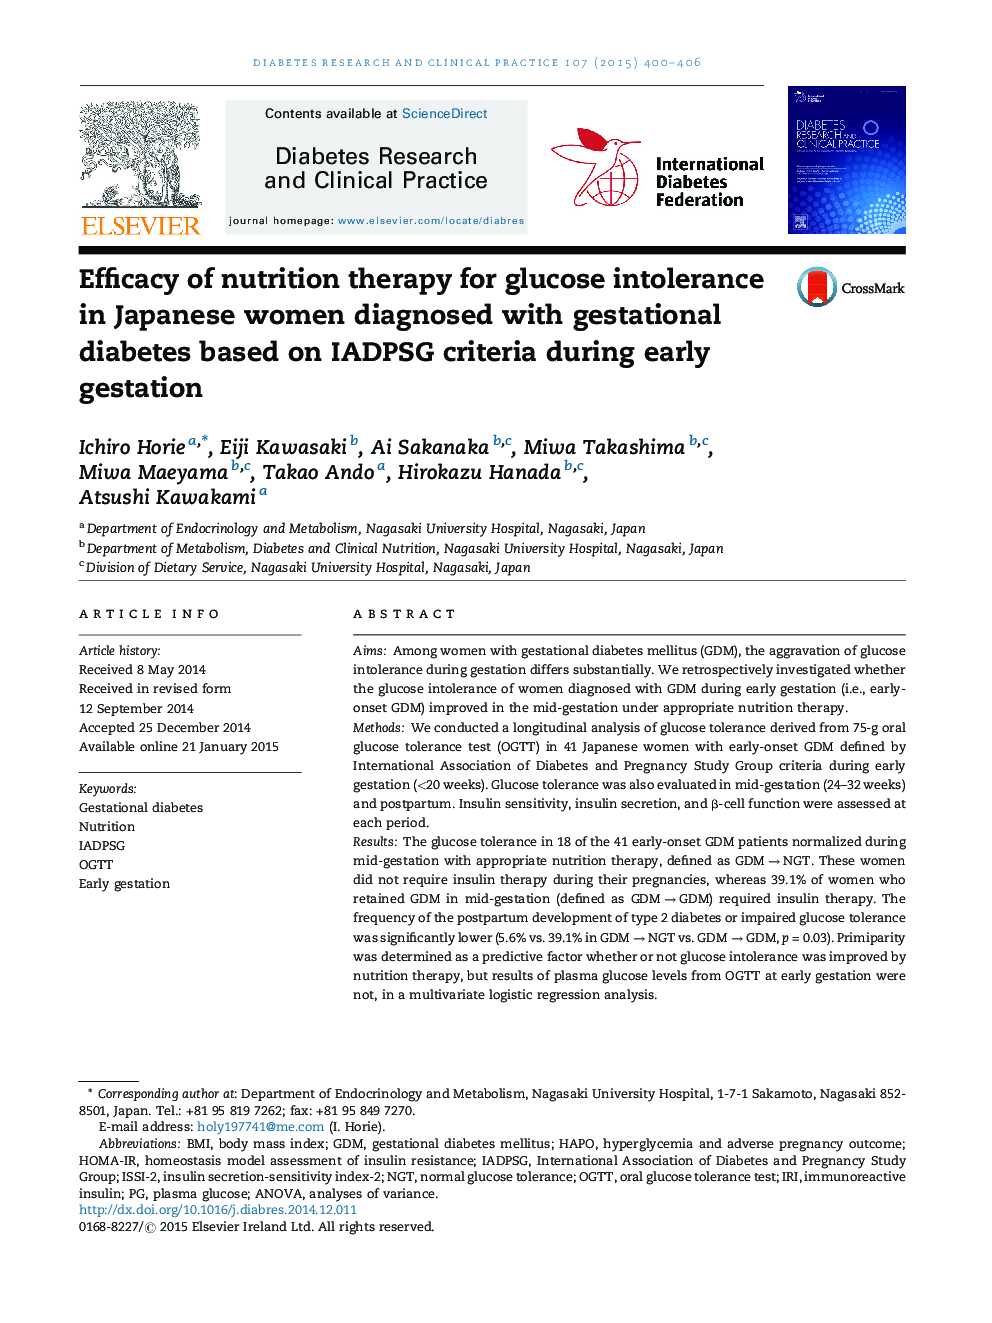 Efficacy of nutrition therapy for glucose intolerance in Japanese women diagnosed with gestational diabetes based on IADPSG criteria during early gestation